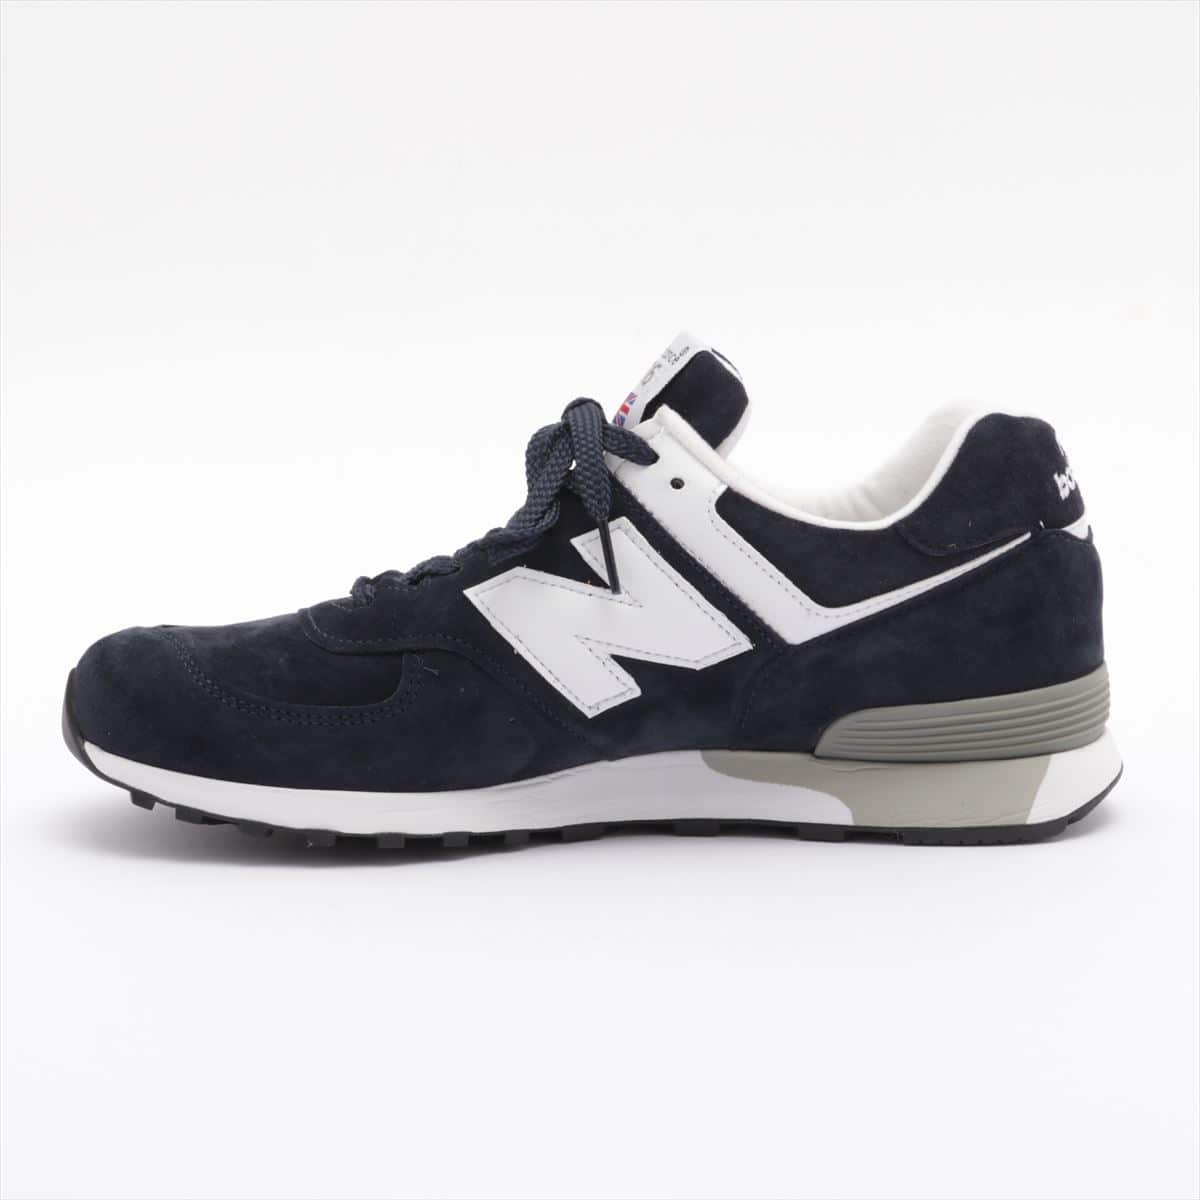 New Balance Suede & leather Sneakers UK8 Men's Navy blue M576DNW